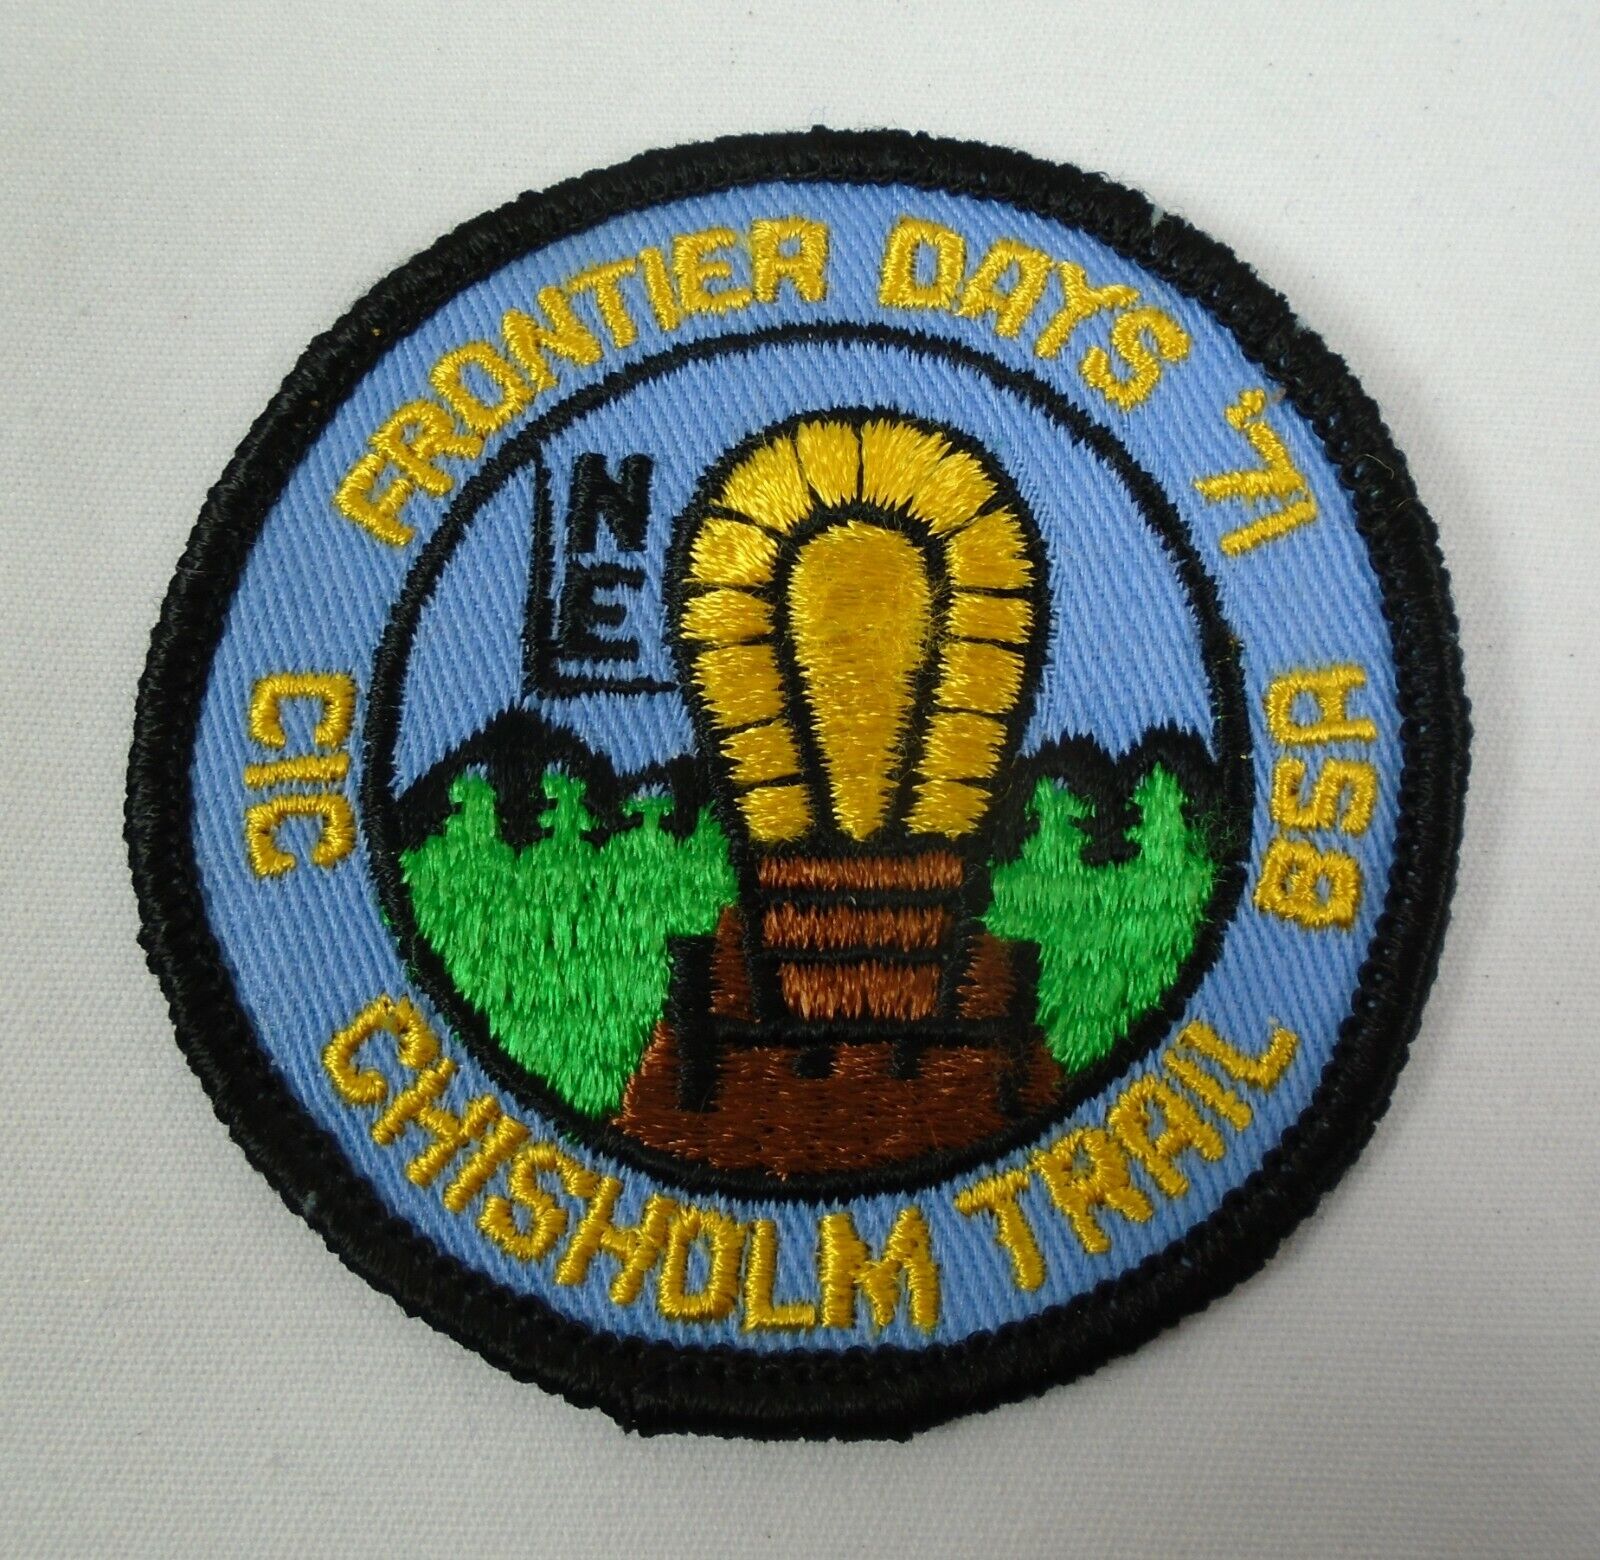 1971 Frontier Days Chisholm Trail CIC BSA Boy Scouts Collector Patch